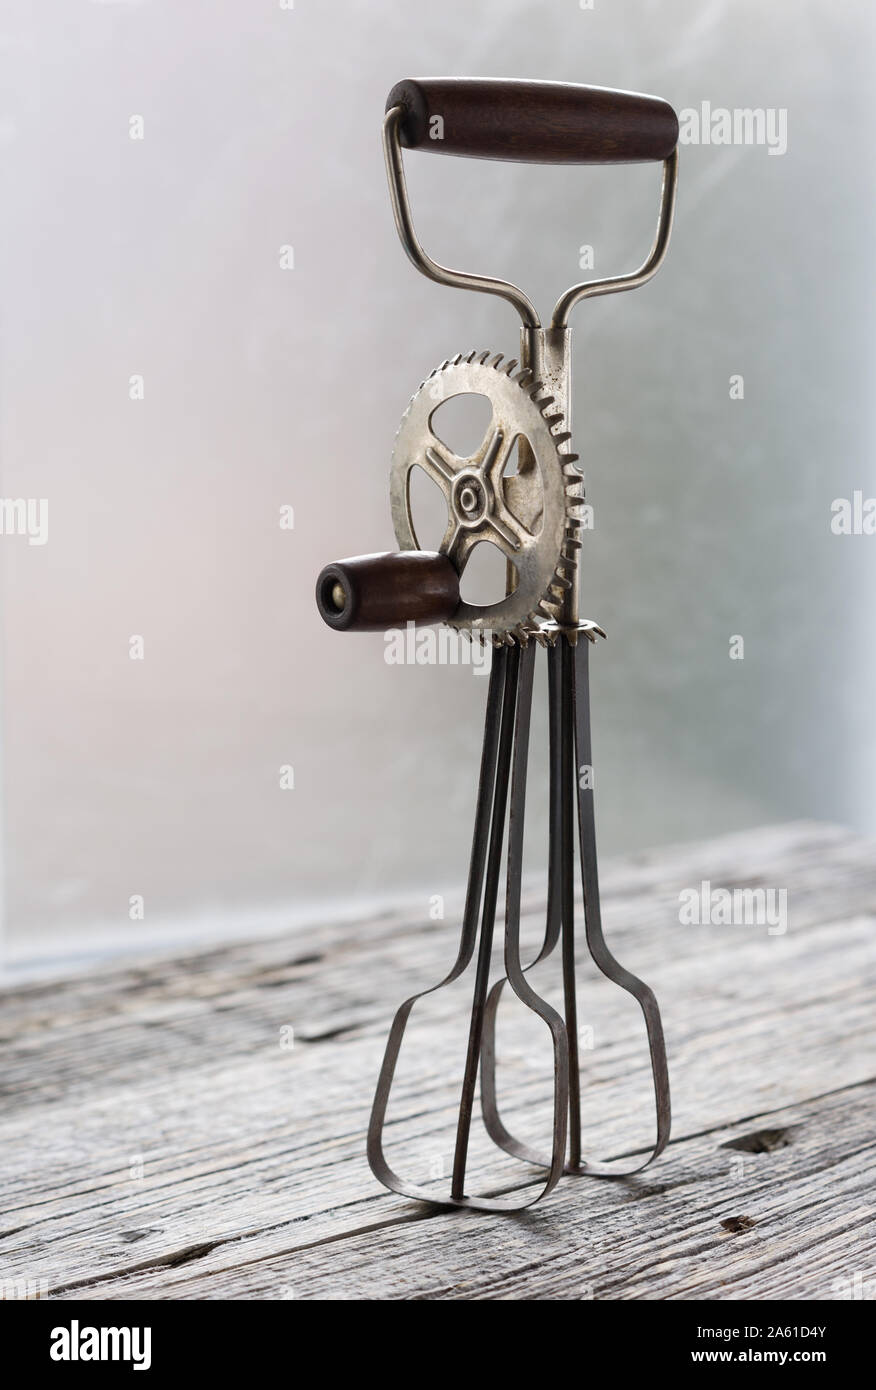 Vintage Old Fashioned Metal Hand Mixer Eggbeater Isolated White Background  Stock Photo - Download Image Now - iStock